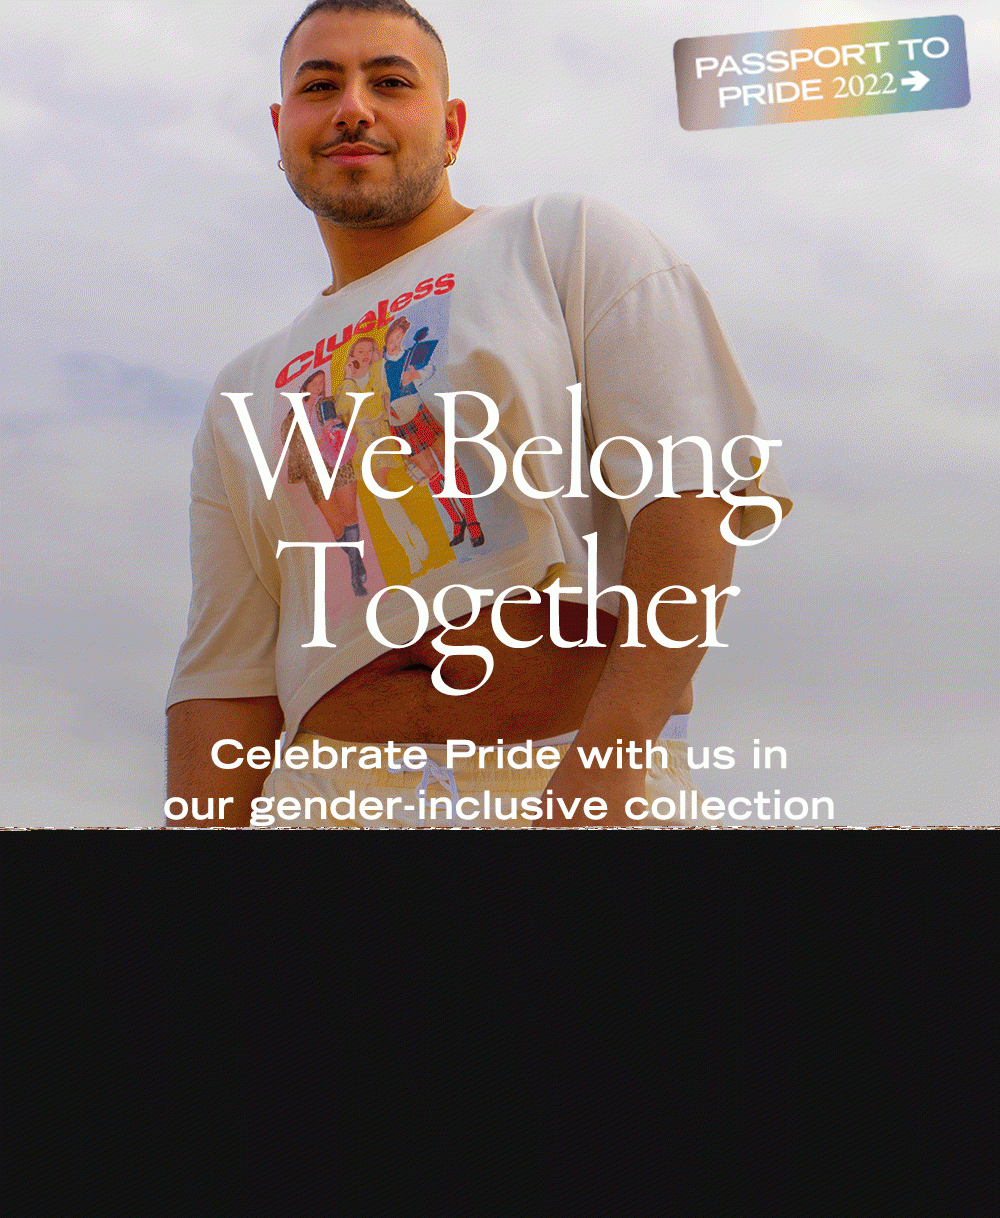 We Belong Together Celebrate Pride with us in our gender-inclusive collection designed for everyone.